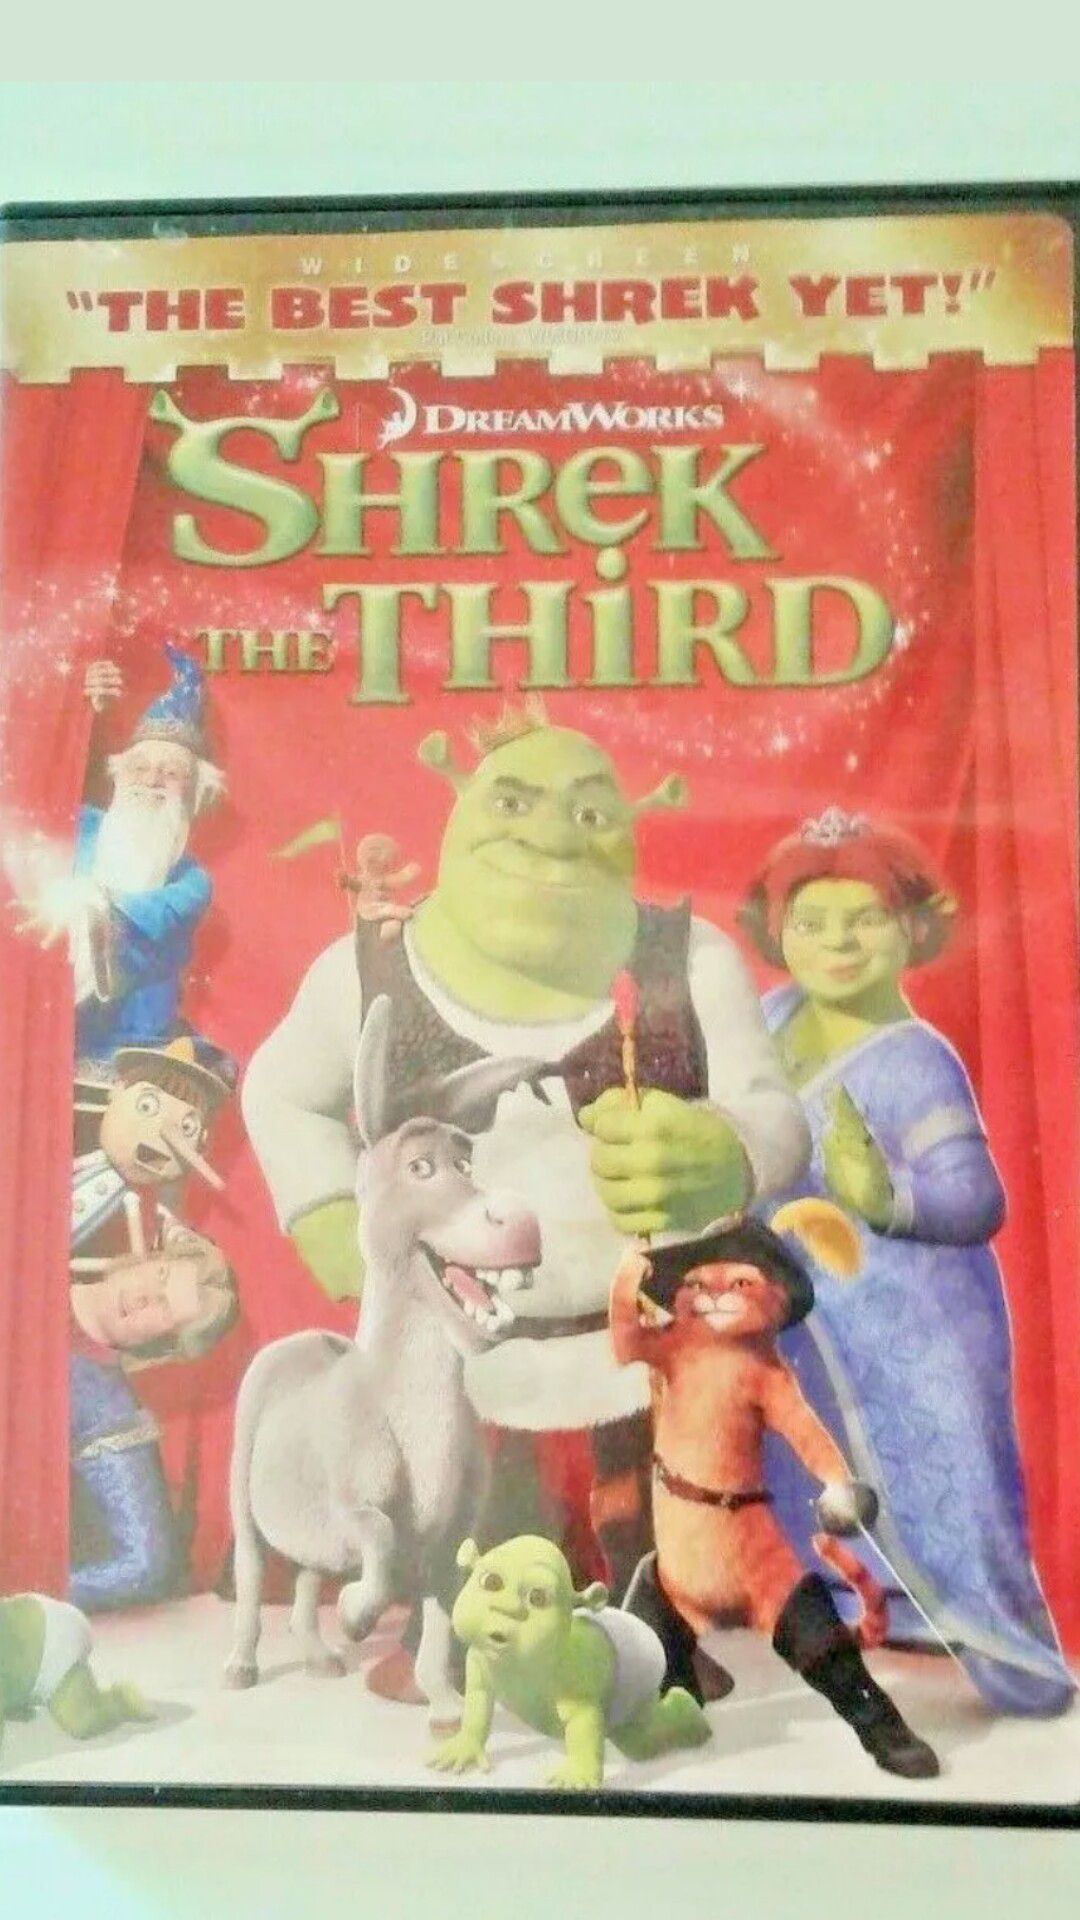 Dvd "SHREK THE THIRD" tested and works great/ FAST SHIPPING